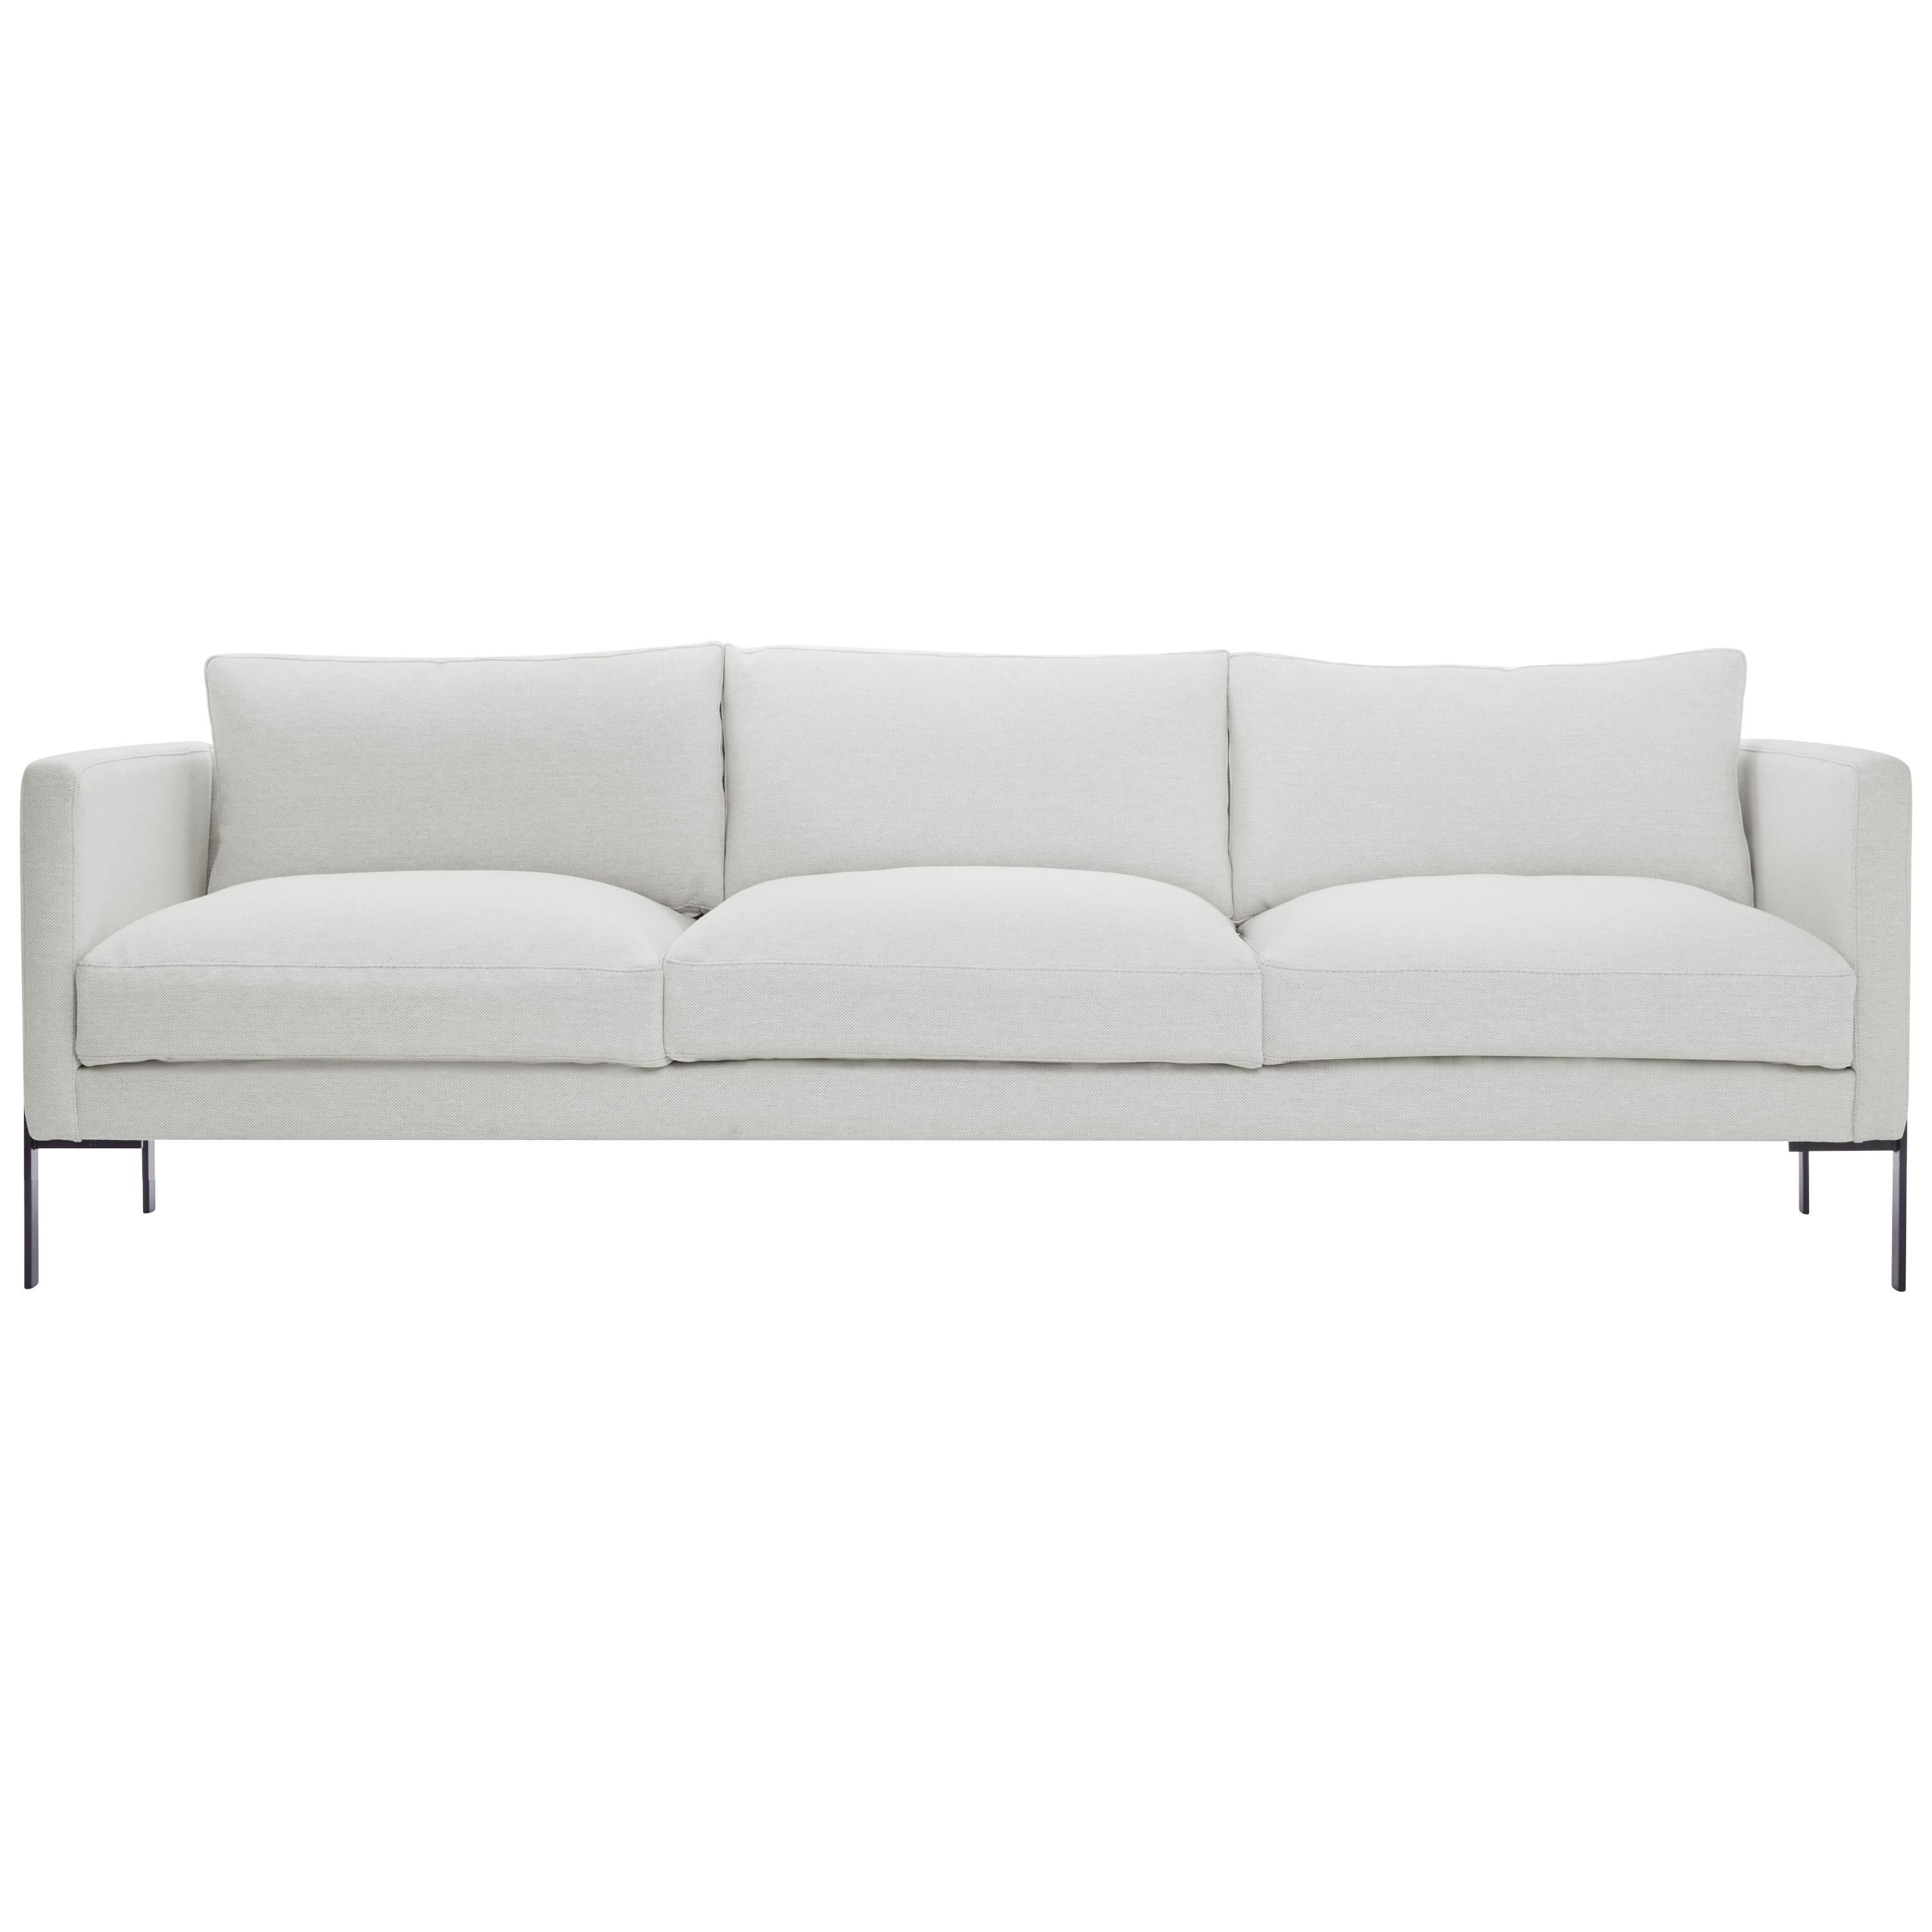 Truss Sofa in Maharam Clavicle Fabric & Powder-Coated Steel by TRNK For Sale